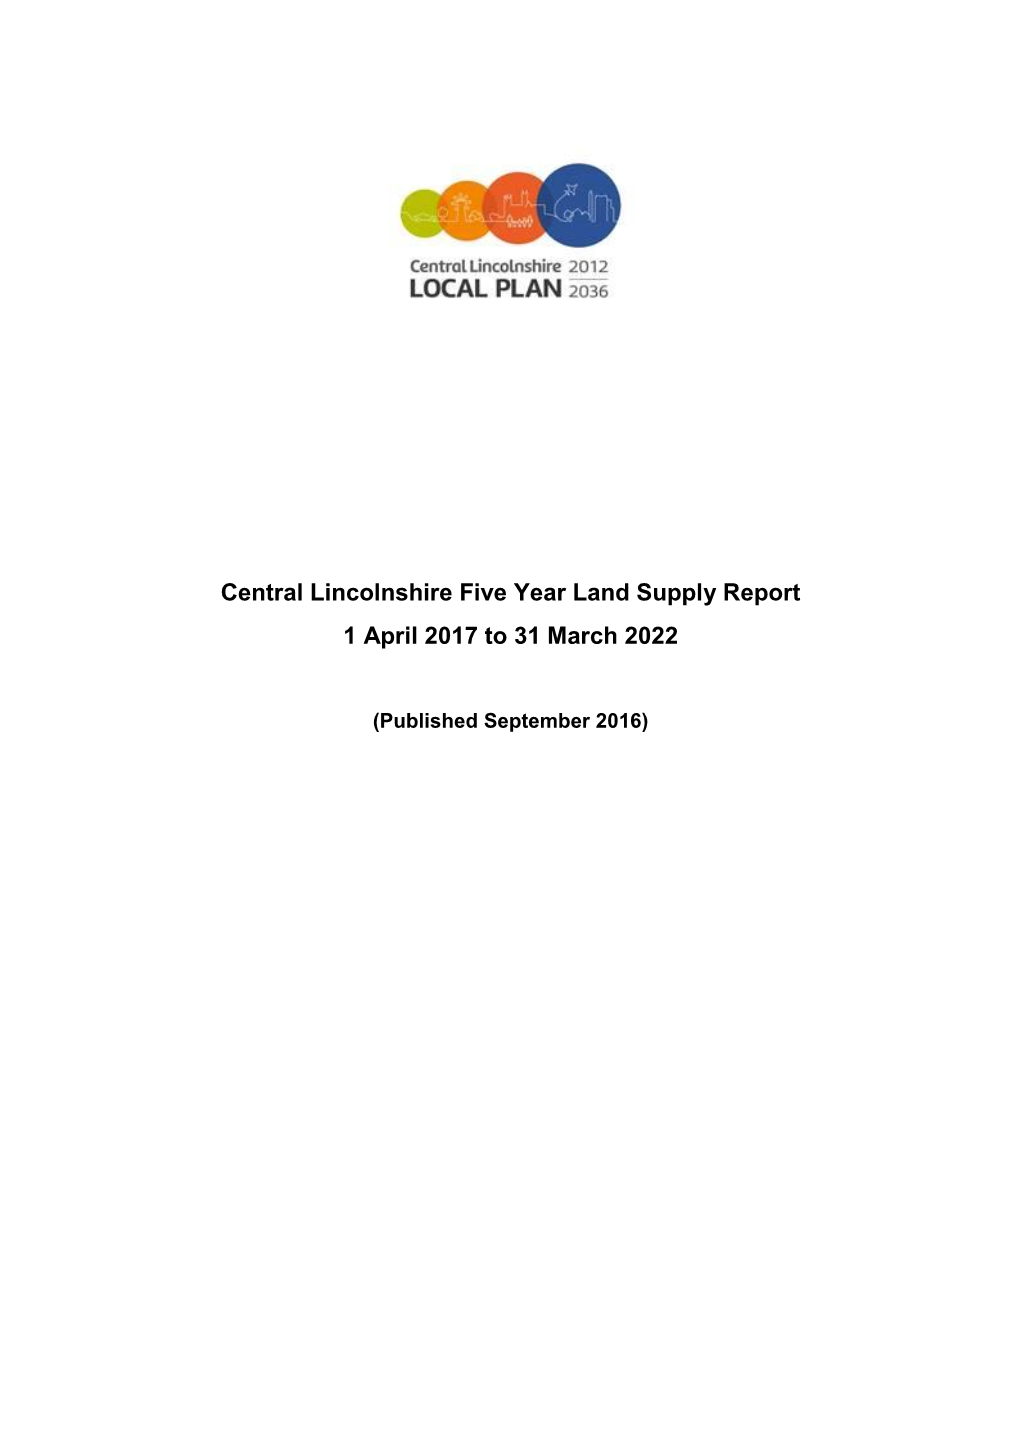 Central Lincolnshire Five Year Land Supply Report 1 April 2017 to 31 March 2022